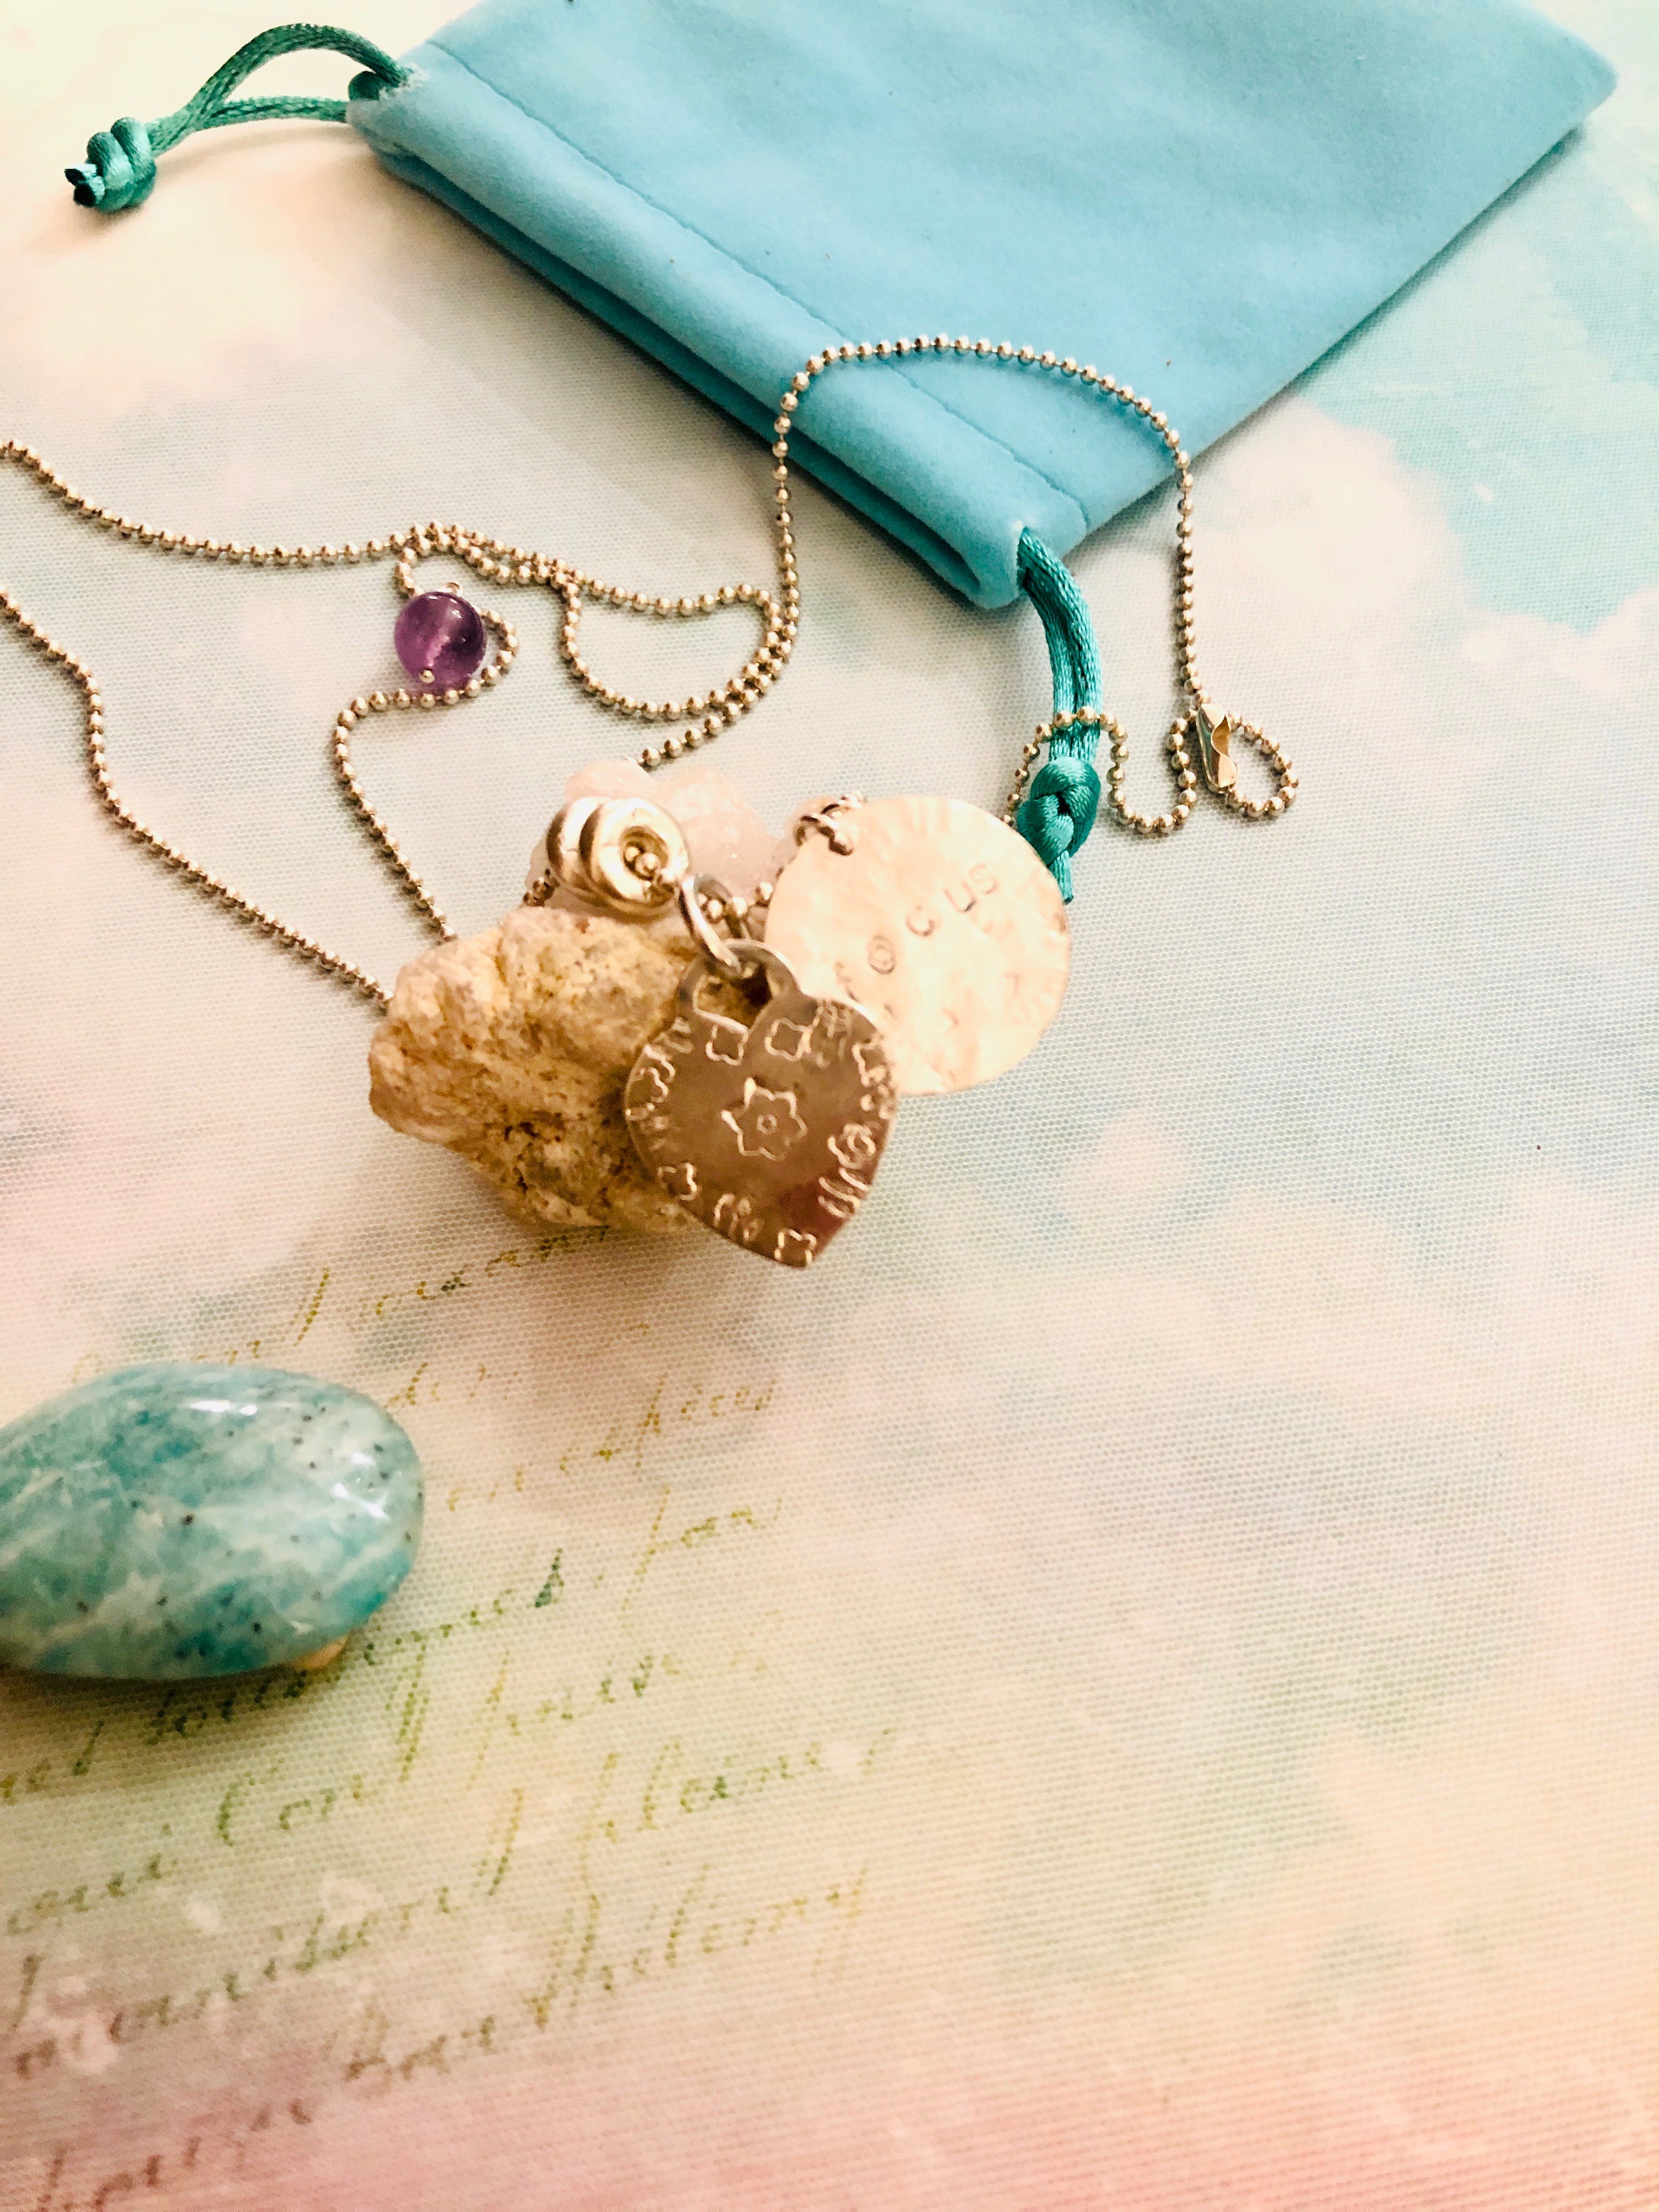 Make Your Own Manifestation Necklace Workshop - Accommodation Bookings